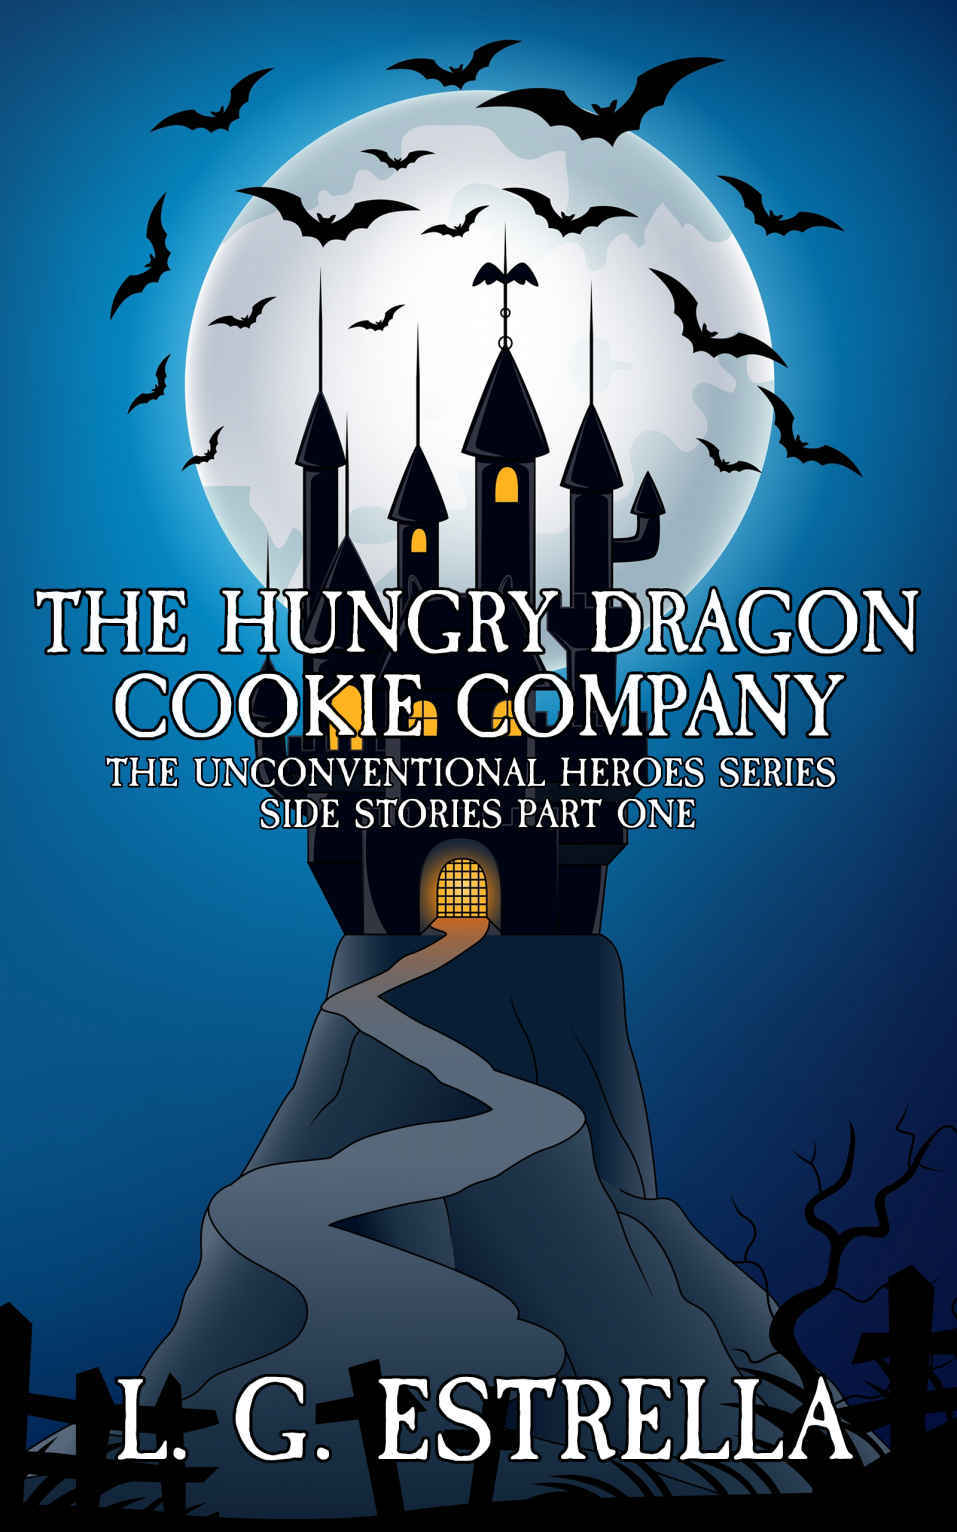 The Hungry Dragon Cookie Company